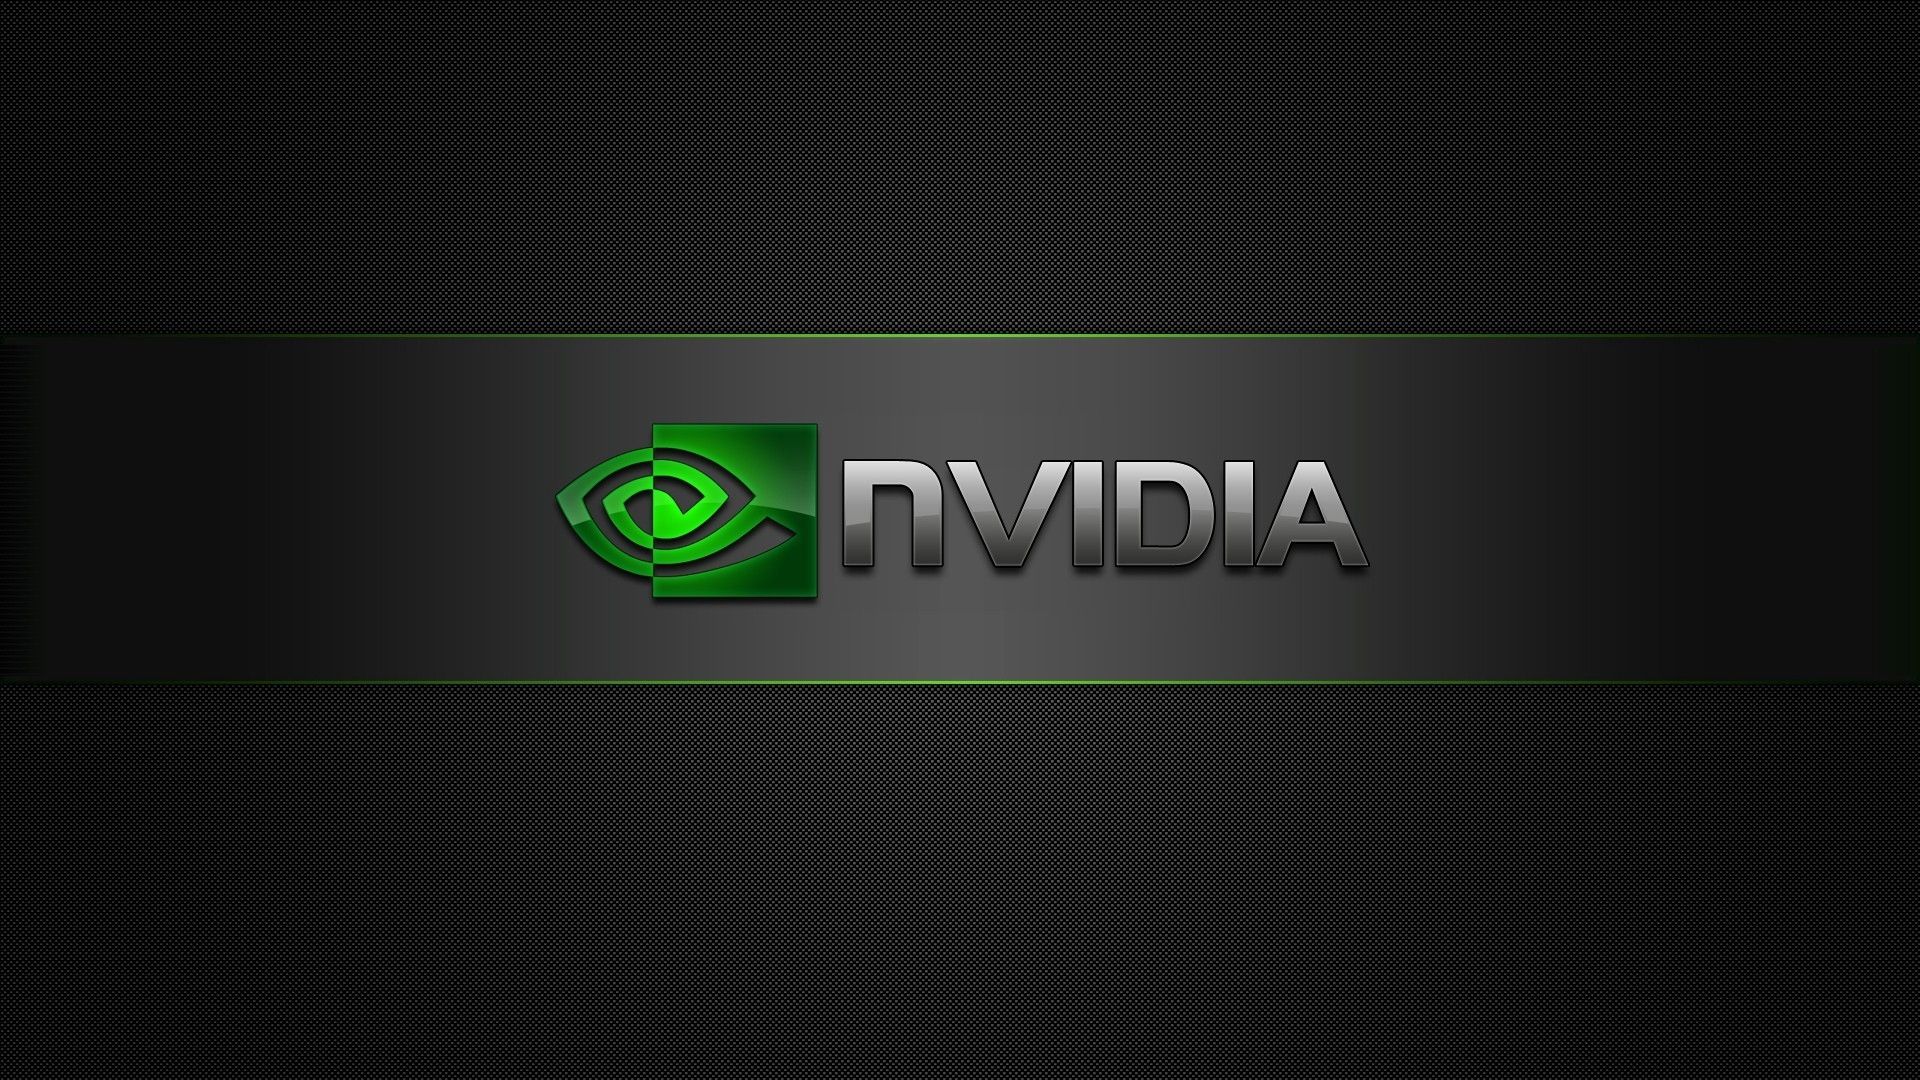 Nvidia Brand Logo, HD Logo, 4k Wallpaper, Image, Background, Photo and Picture